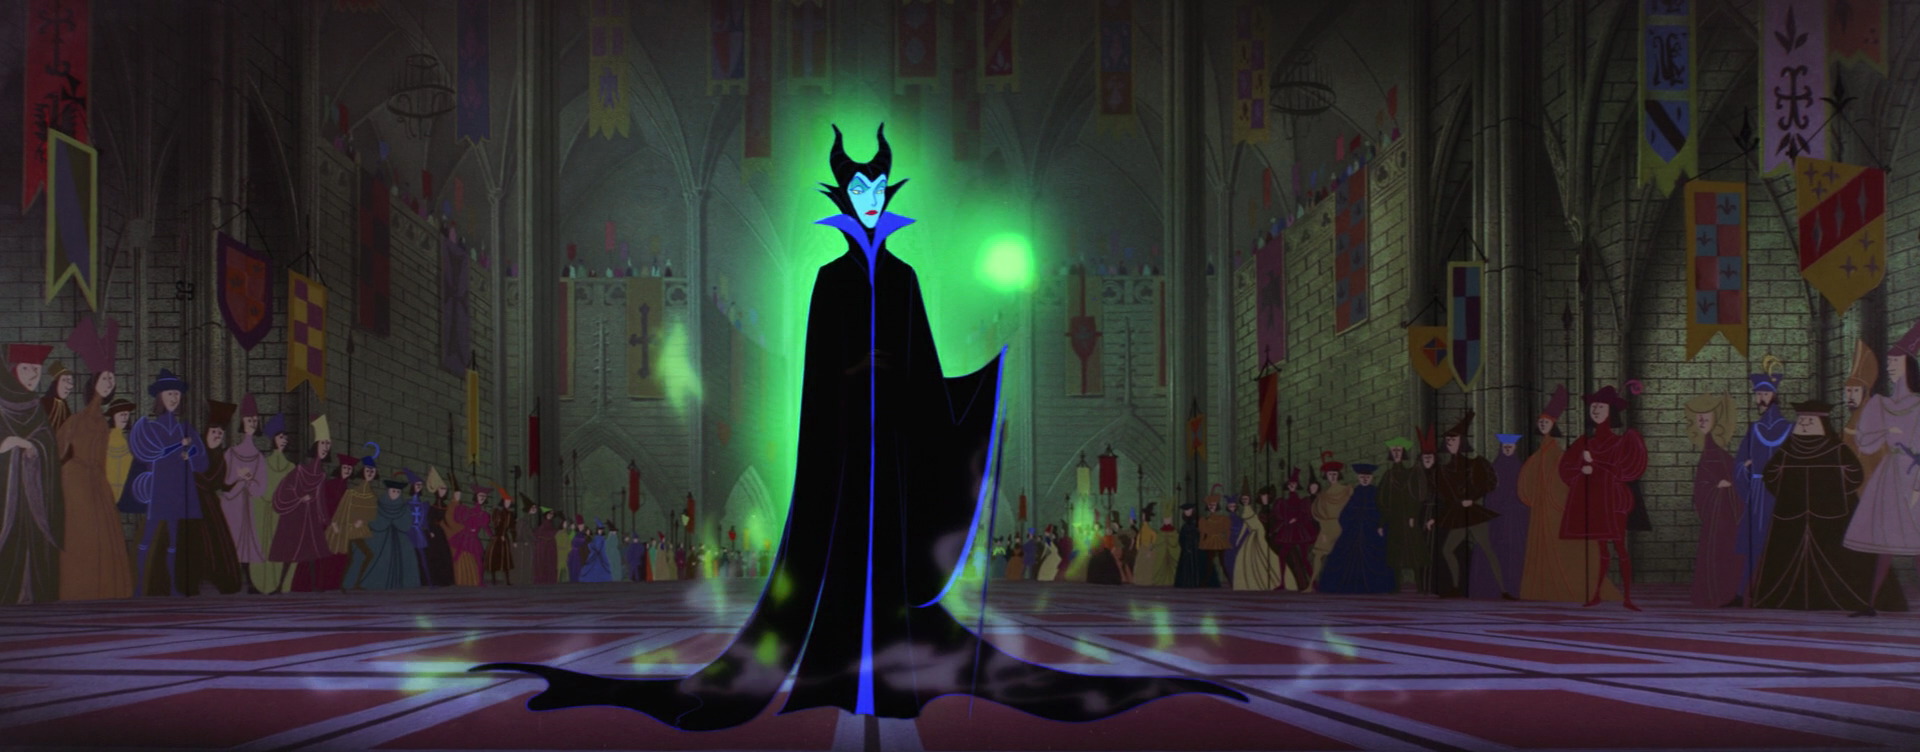 Maleficent's first entrance